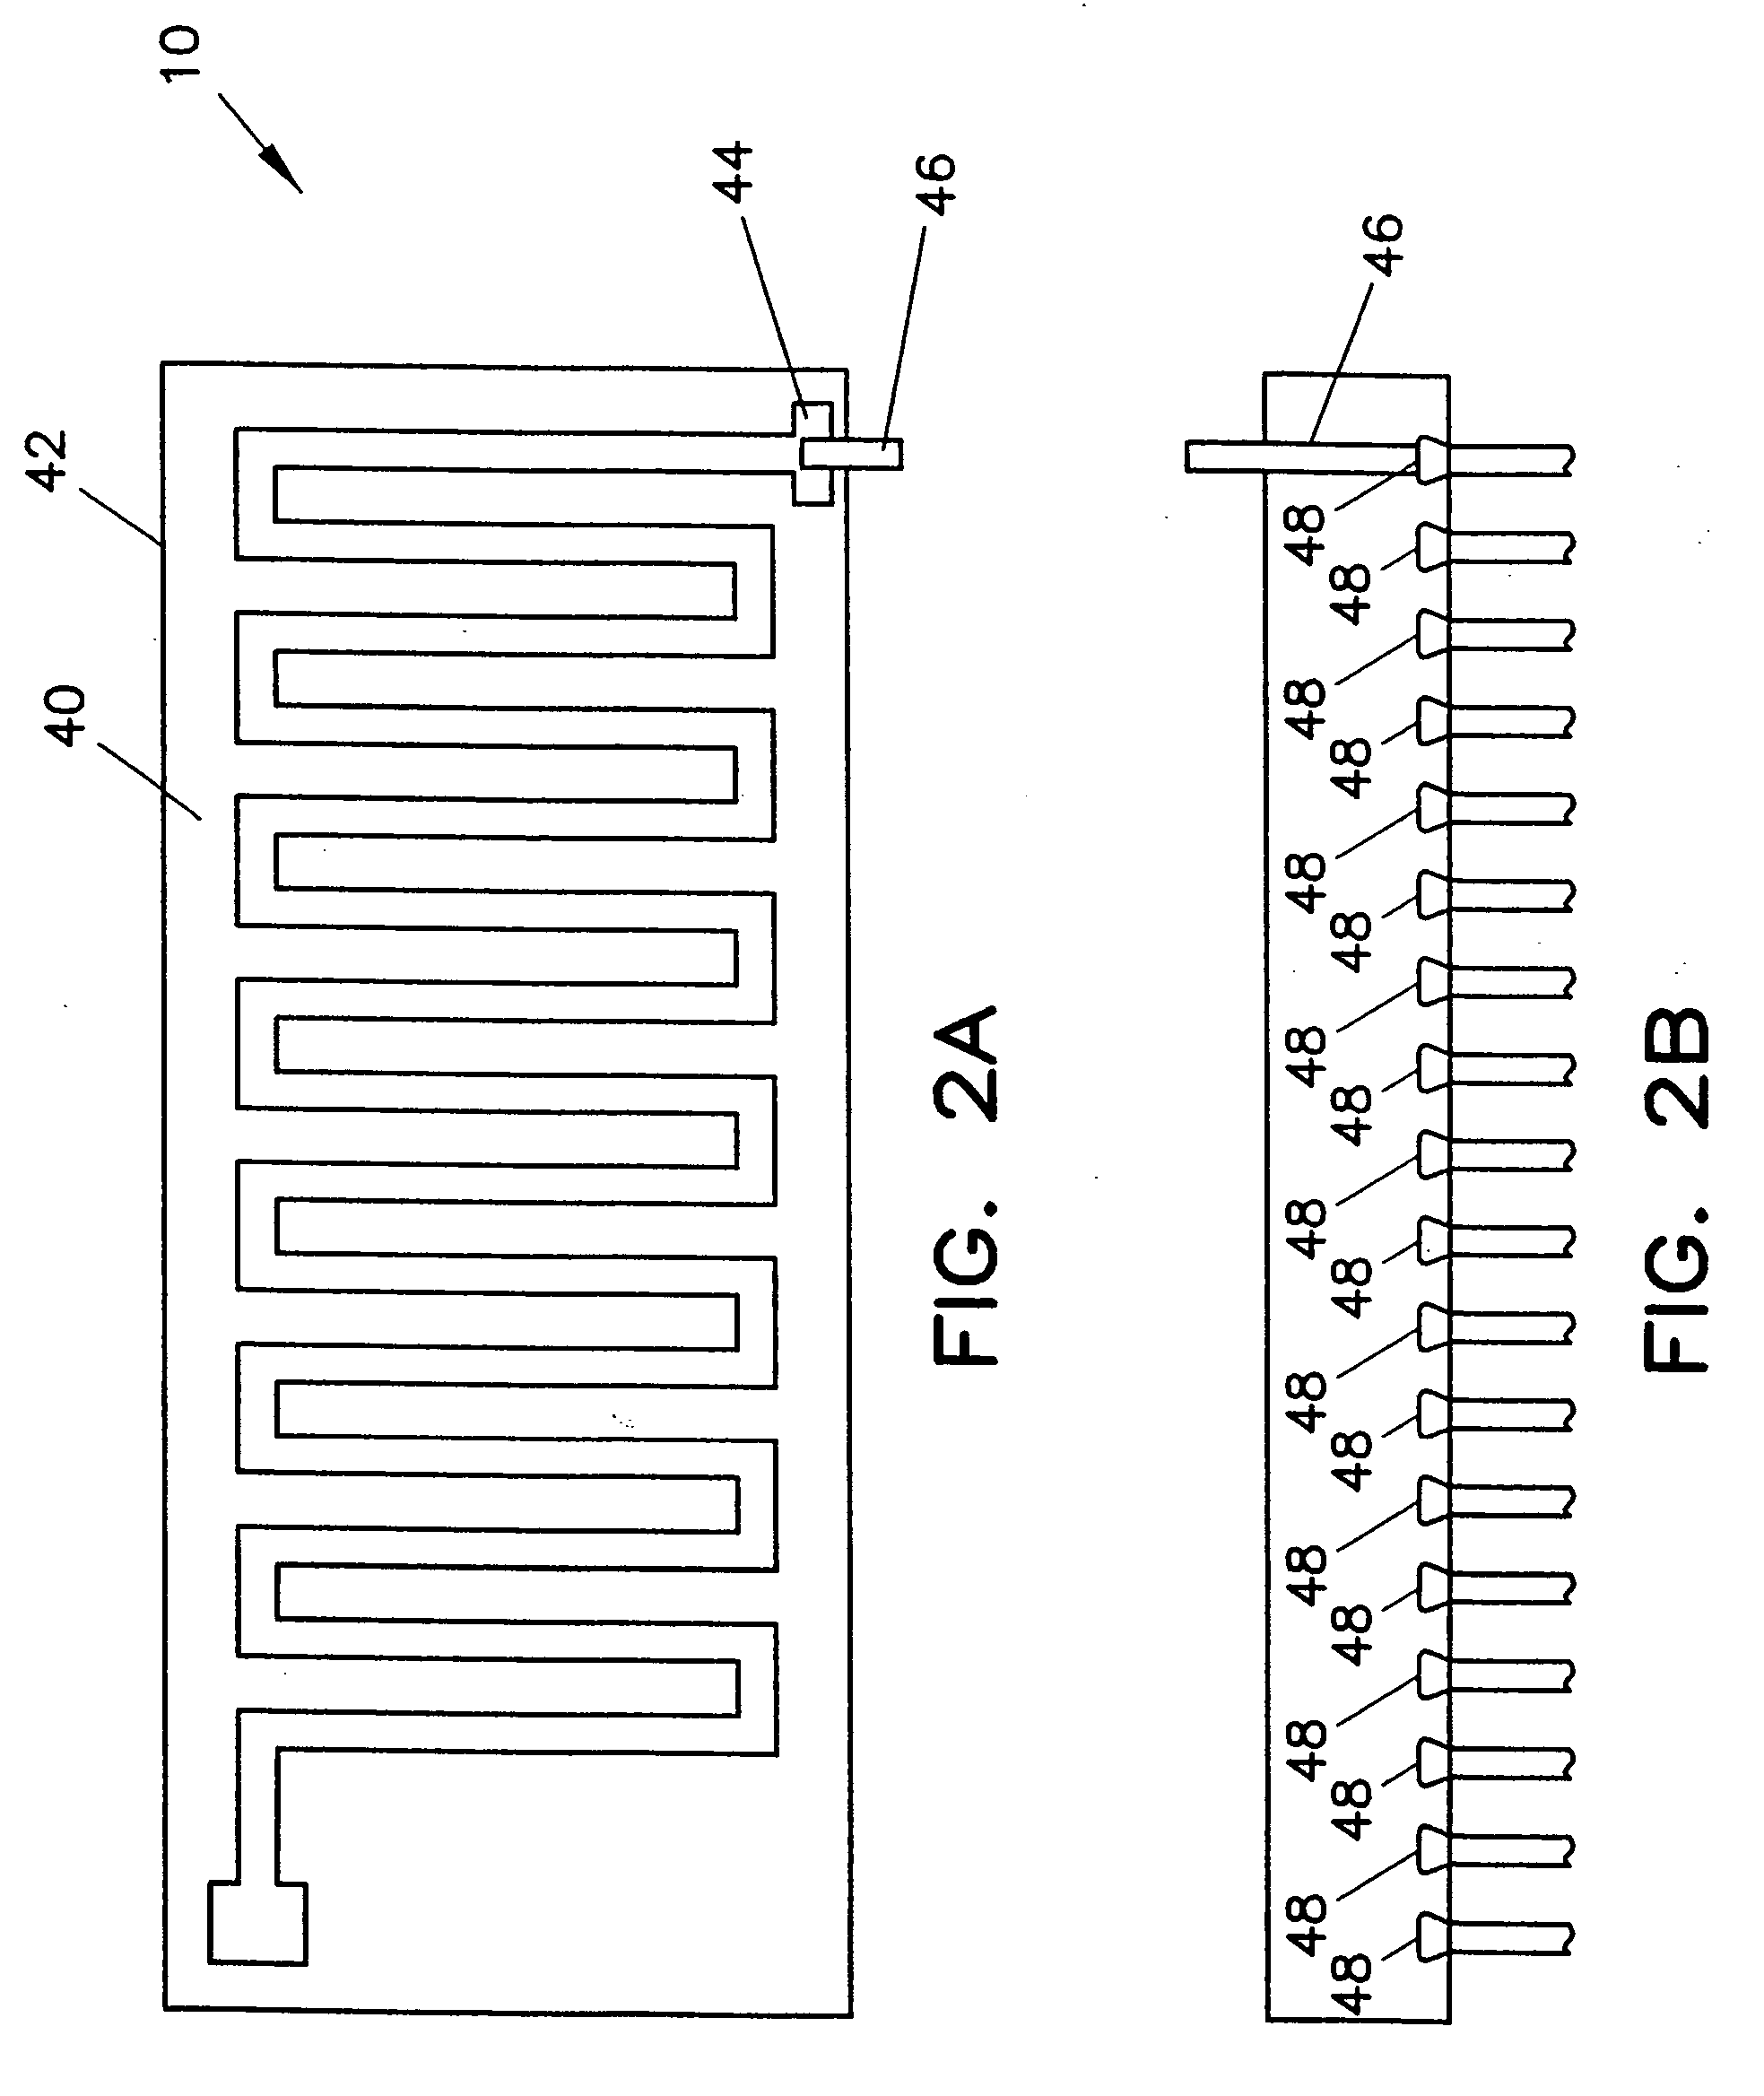 System and method for using film deposition techniques to provide an antenna within an integrated circuit package